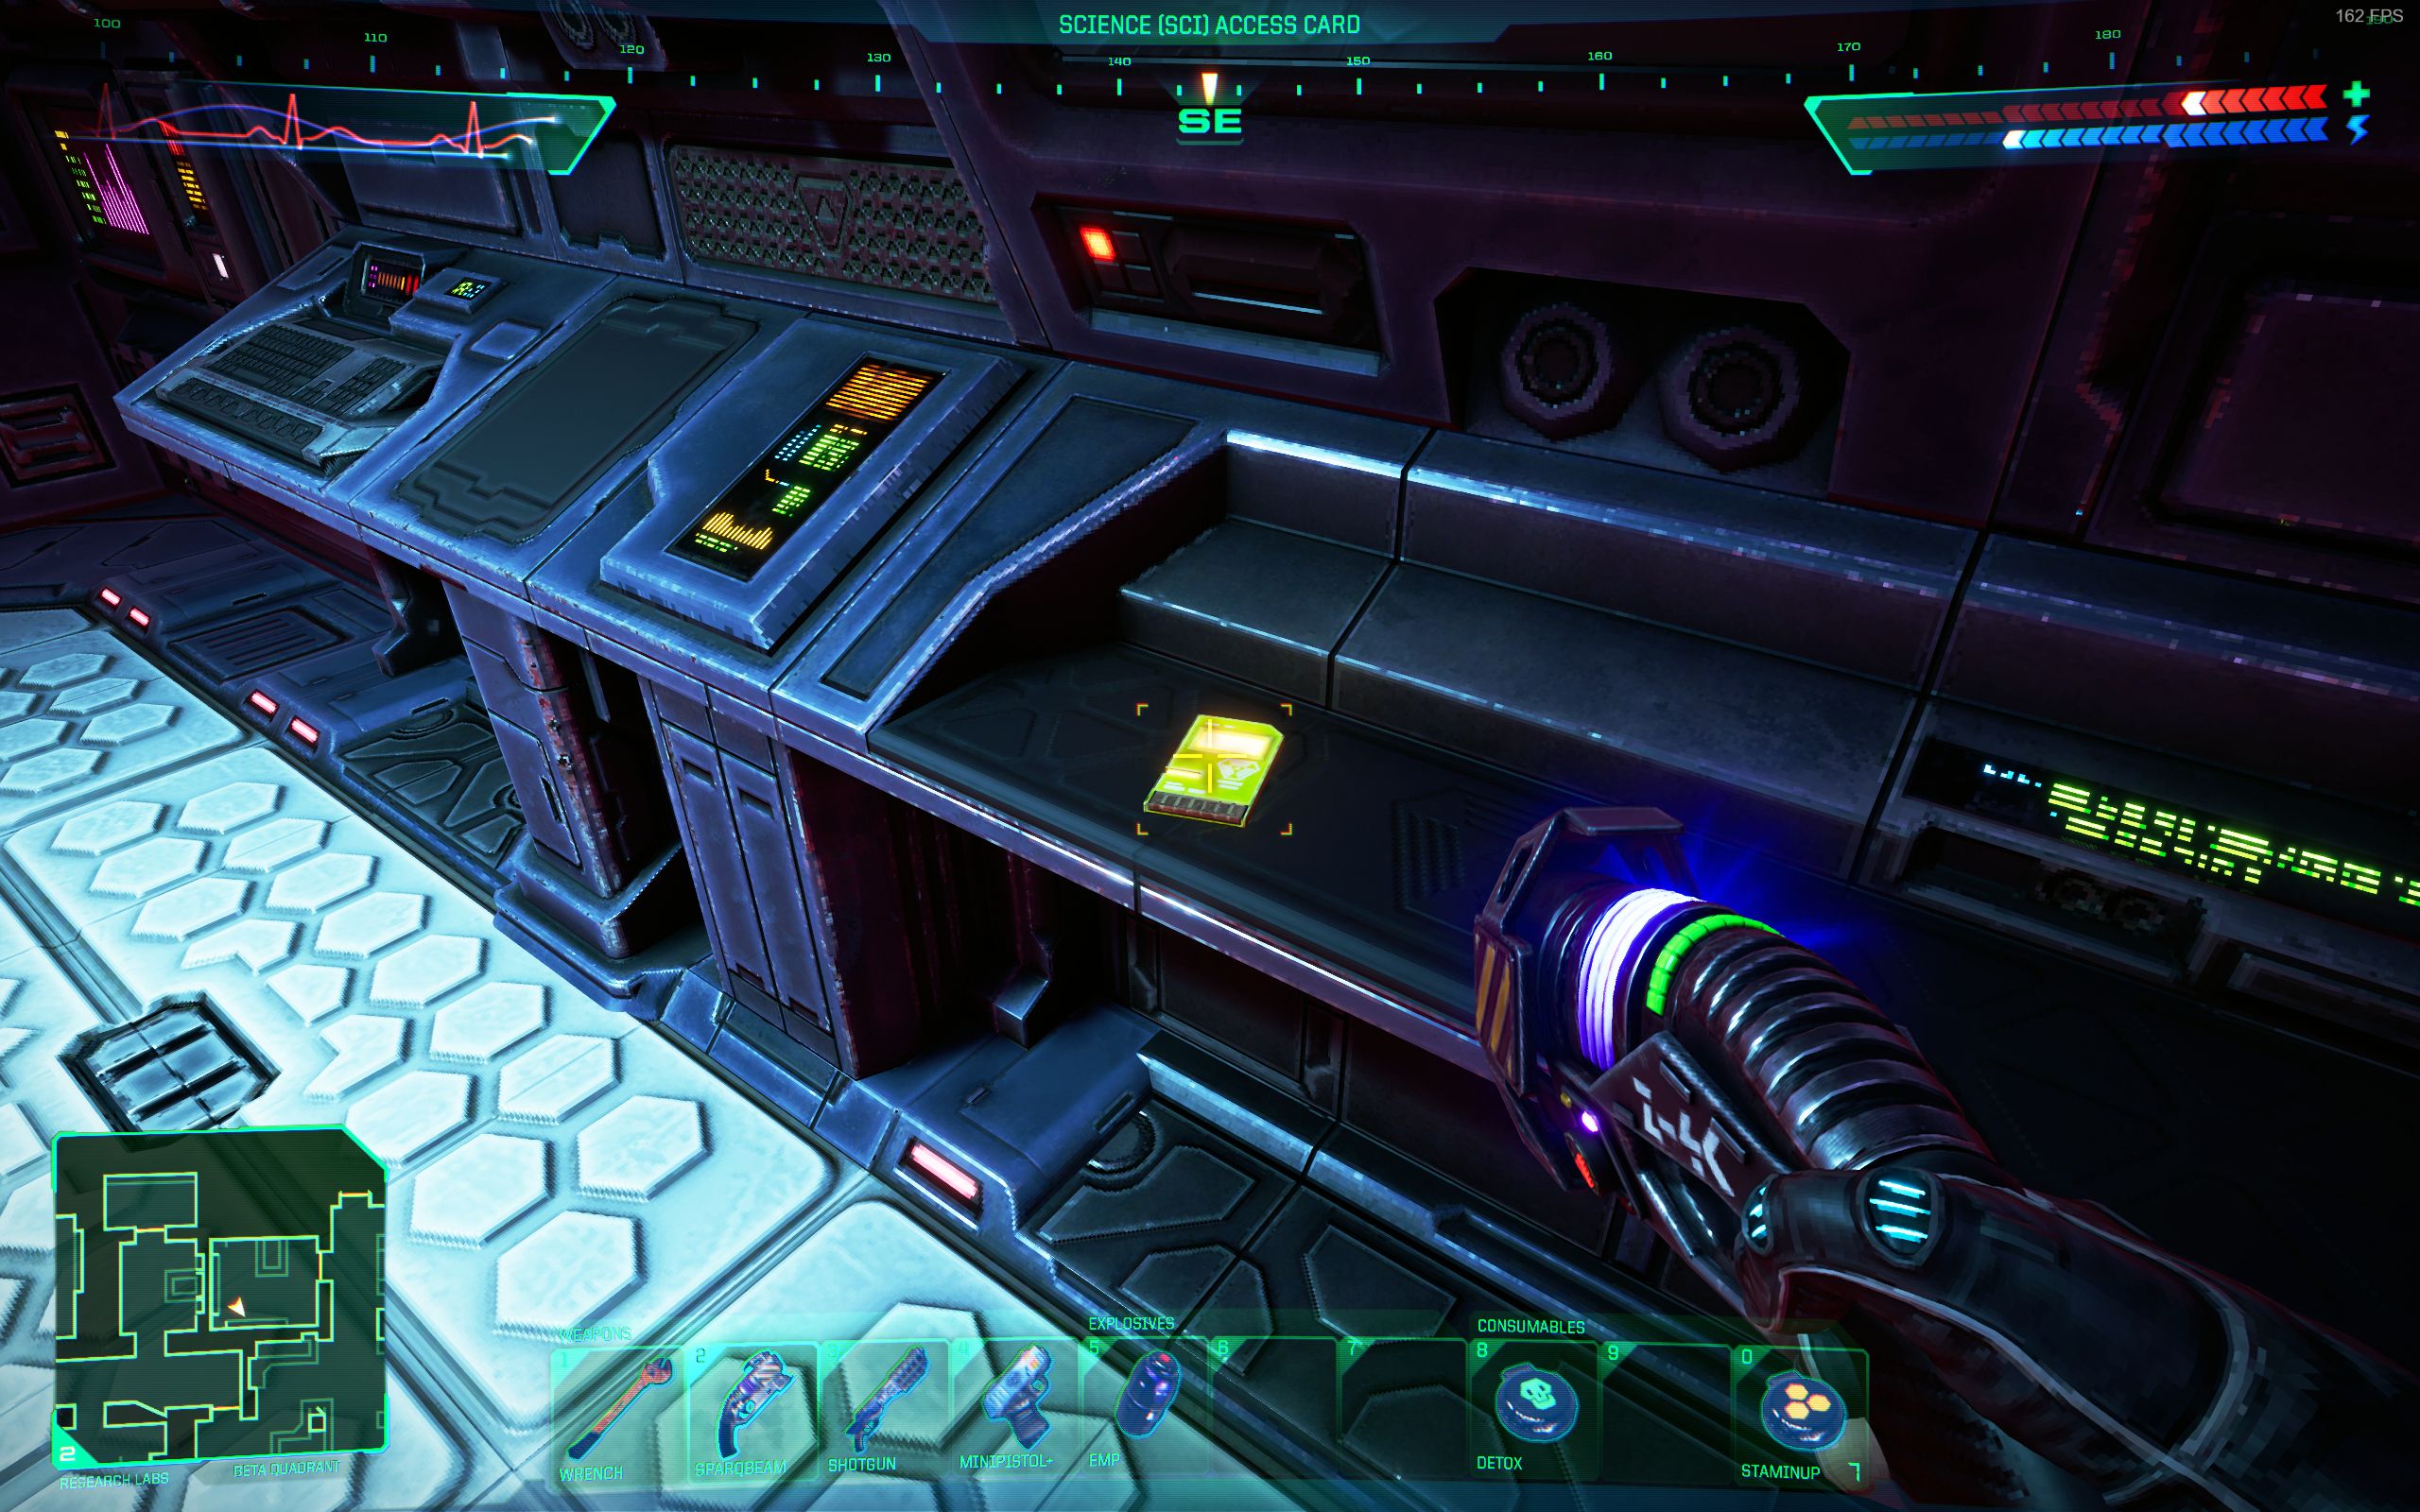 System Shock: Science Access Card Admin Room